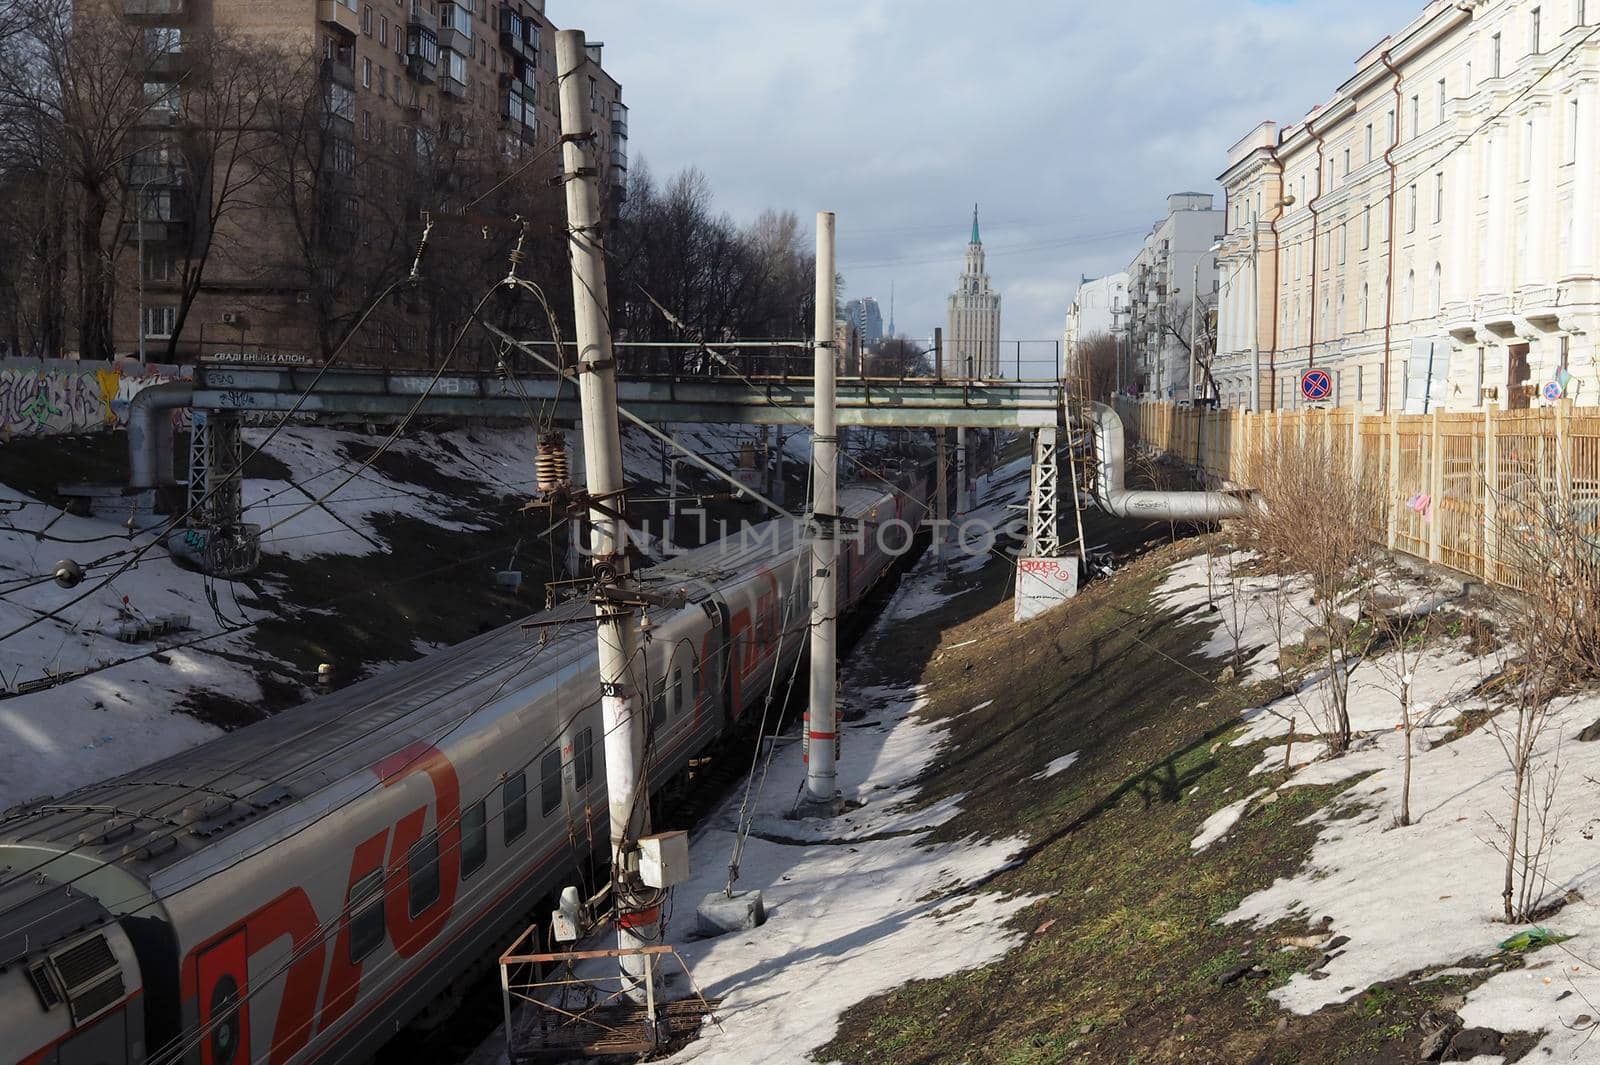 March 10, 2019 Moscow, Russia. A passenger train of the Russian Railways company at the entrance to the Leningradsky railway station in Moscow.